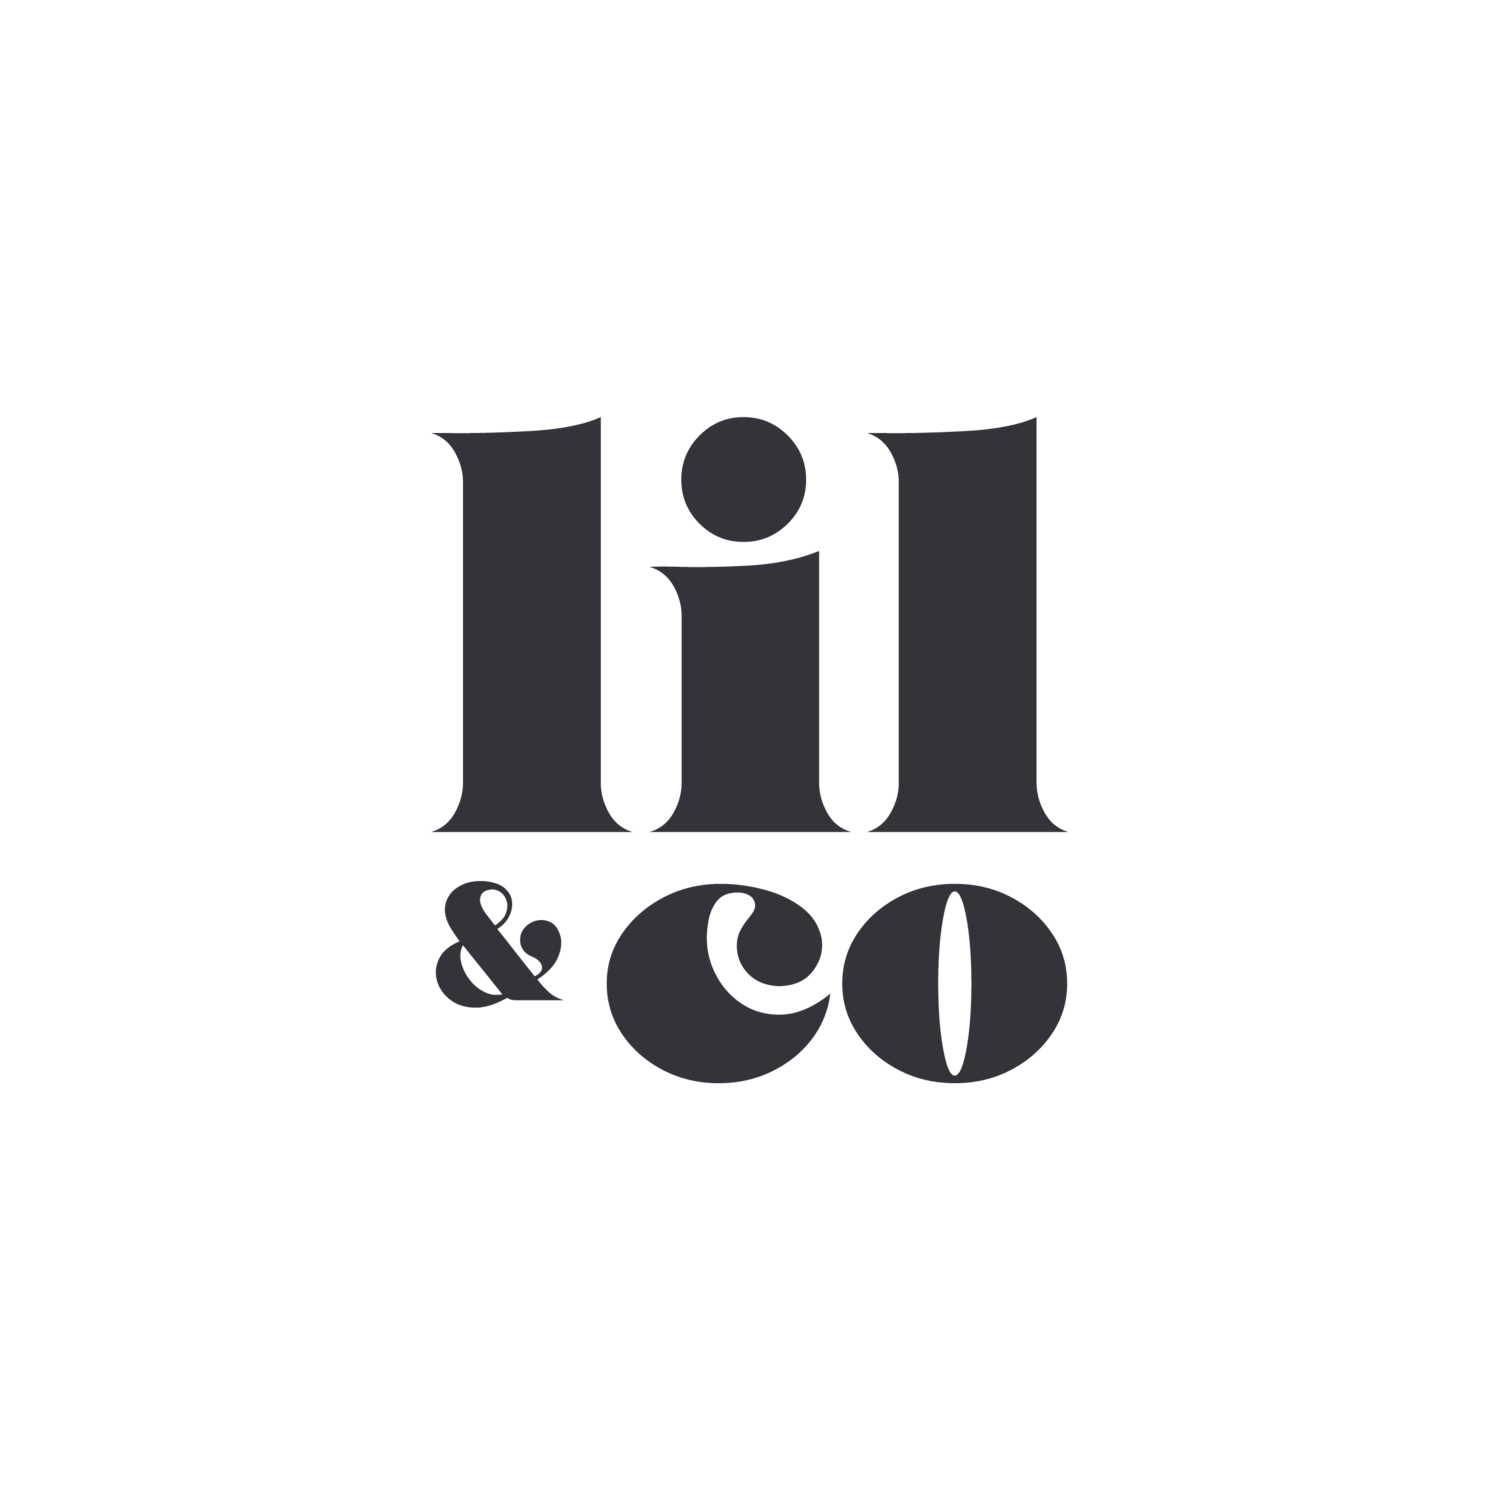 Lil &amp; Co Makers of Natural Products